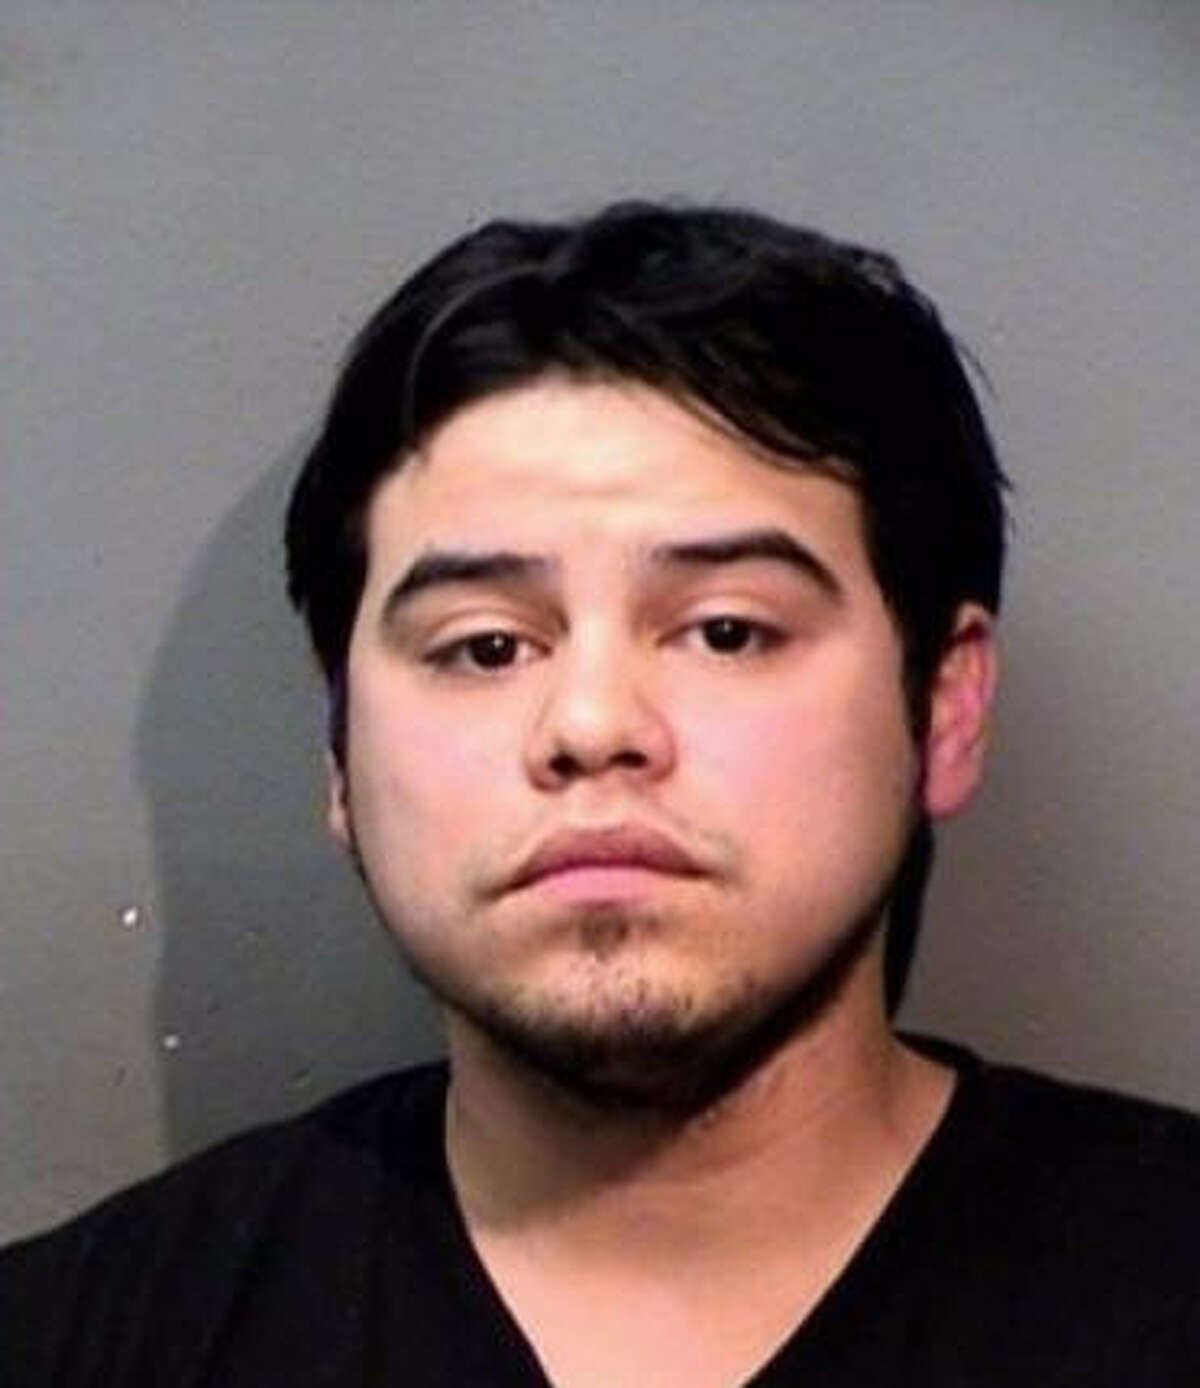 Justin Ryan Rubio, 30, has been sentenced to one year in jail after he left his dog to die of starvation in his apartment. Swipe through to see other animal abuse crimes that made the news.